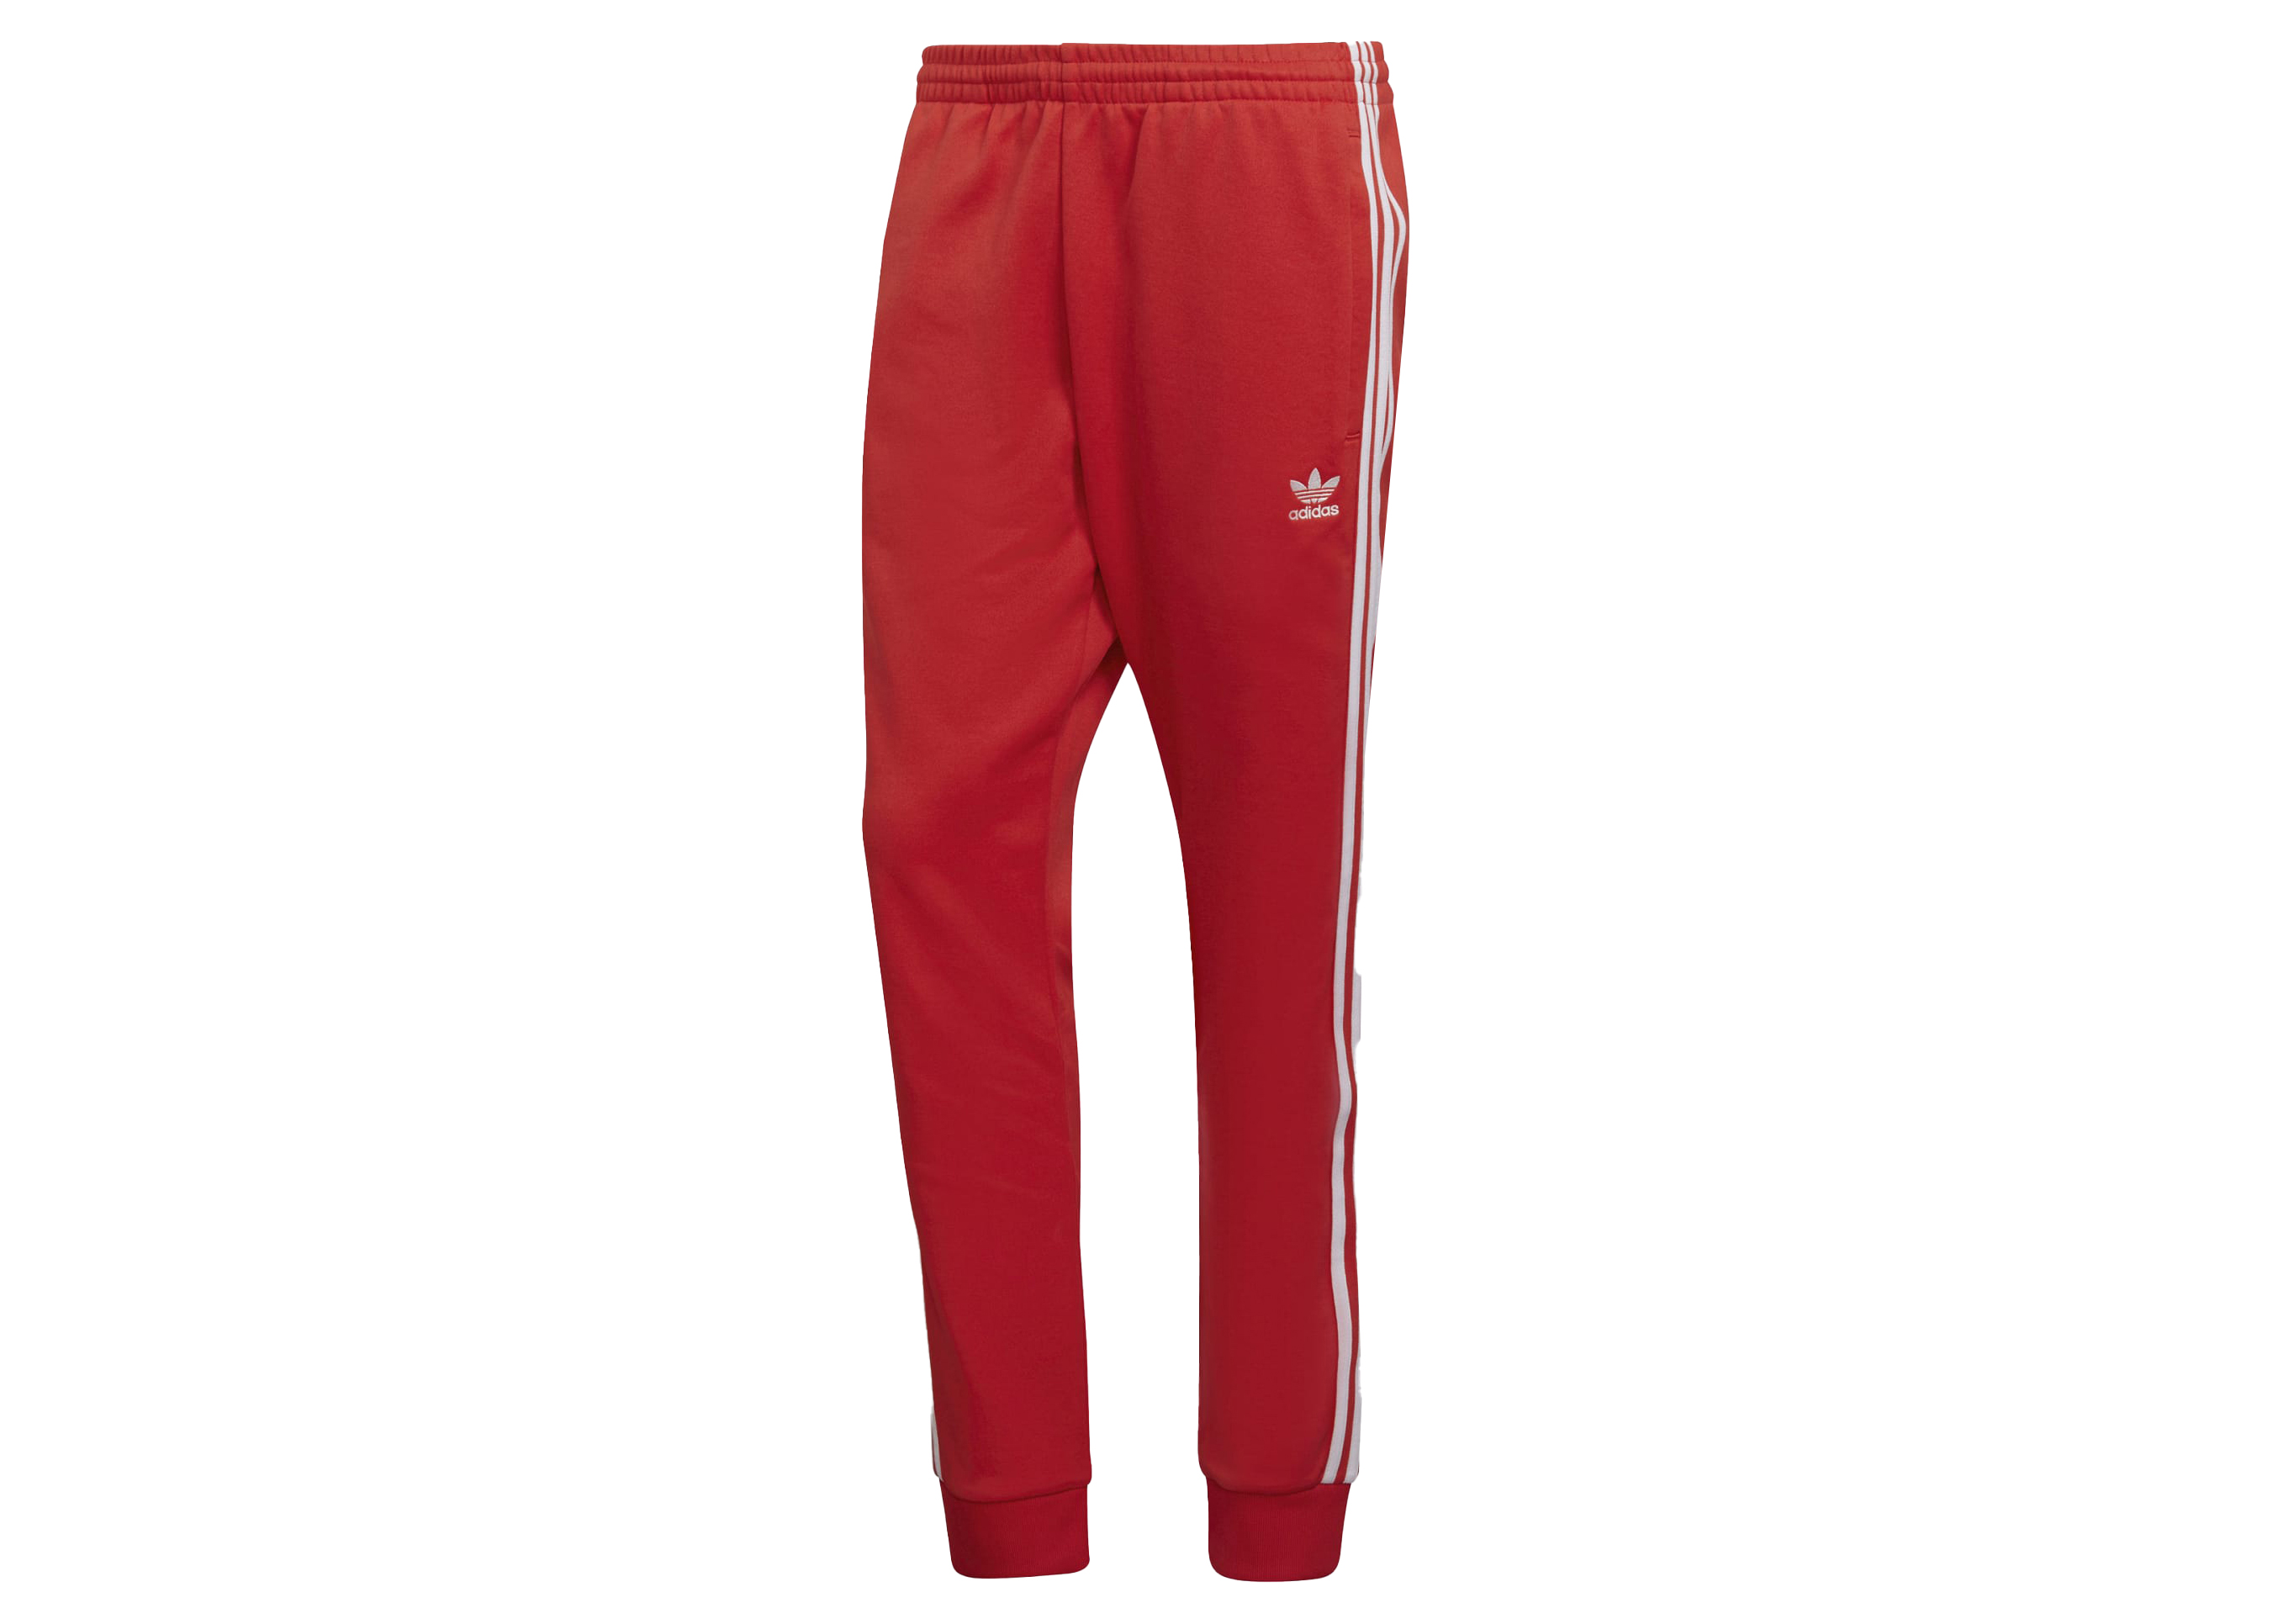 adidas Graphics Floral Firebird Track Pants - Red | Women's Lifestyle |  adidas US